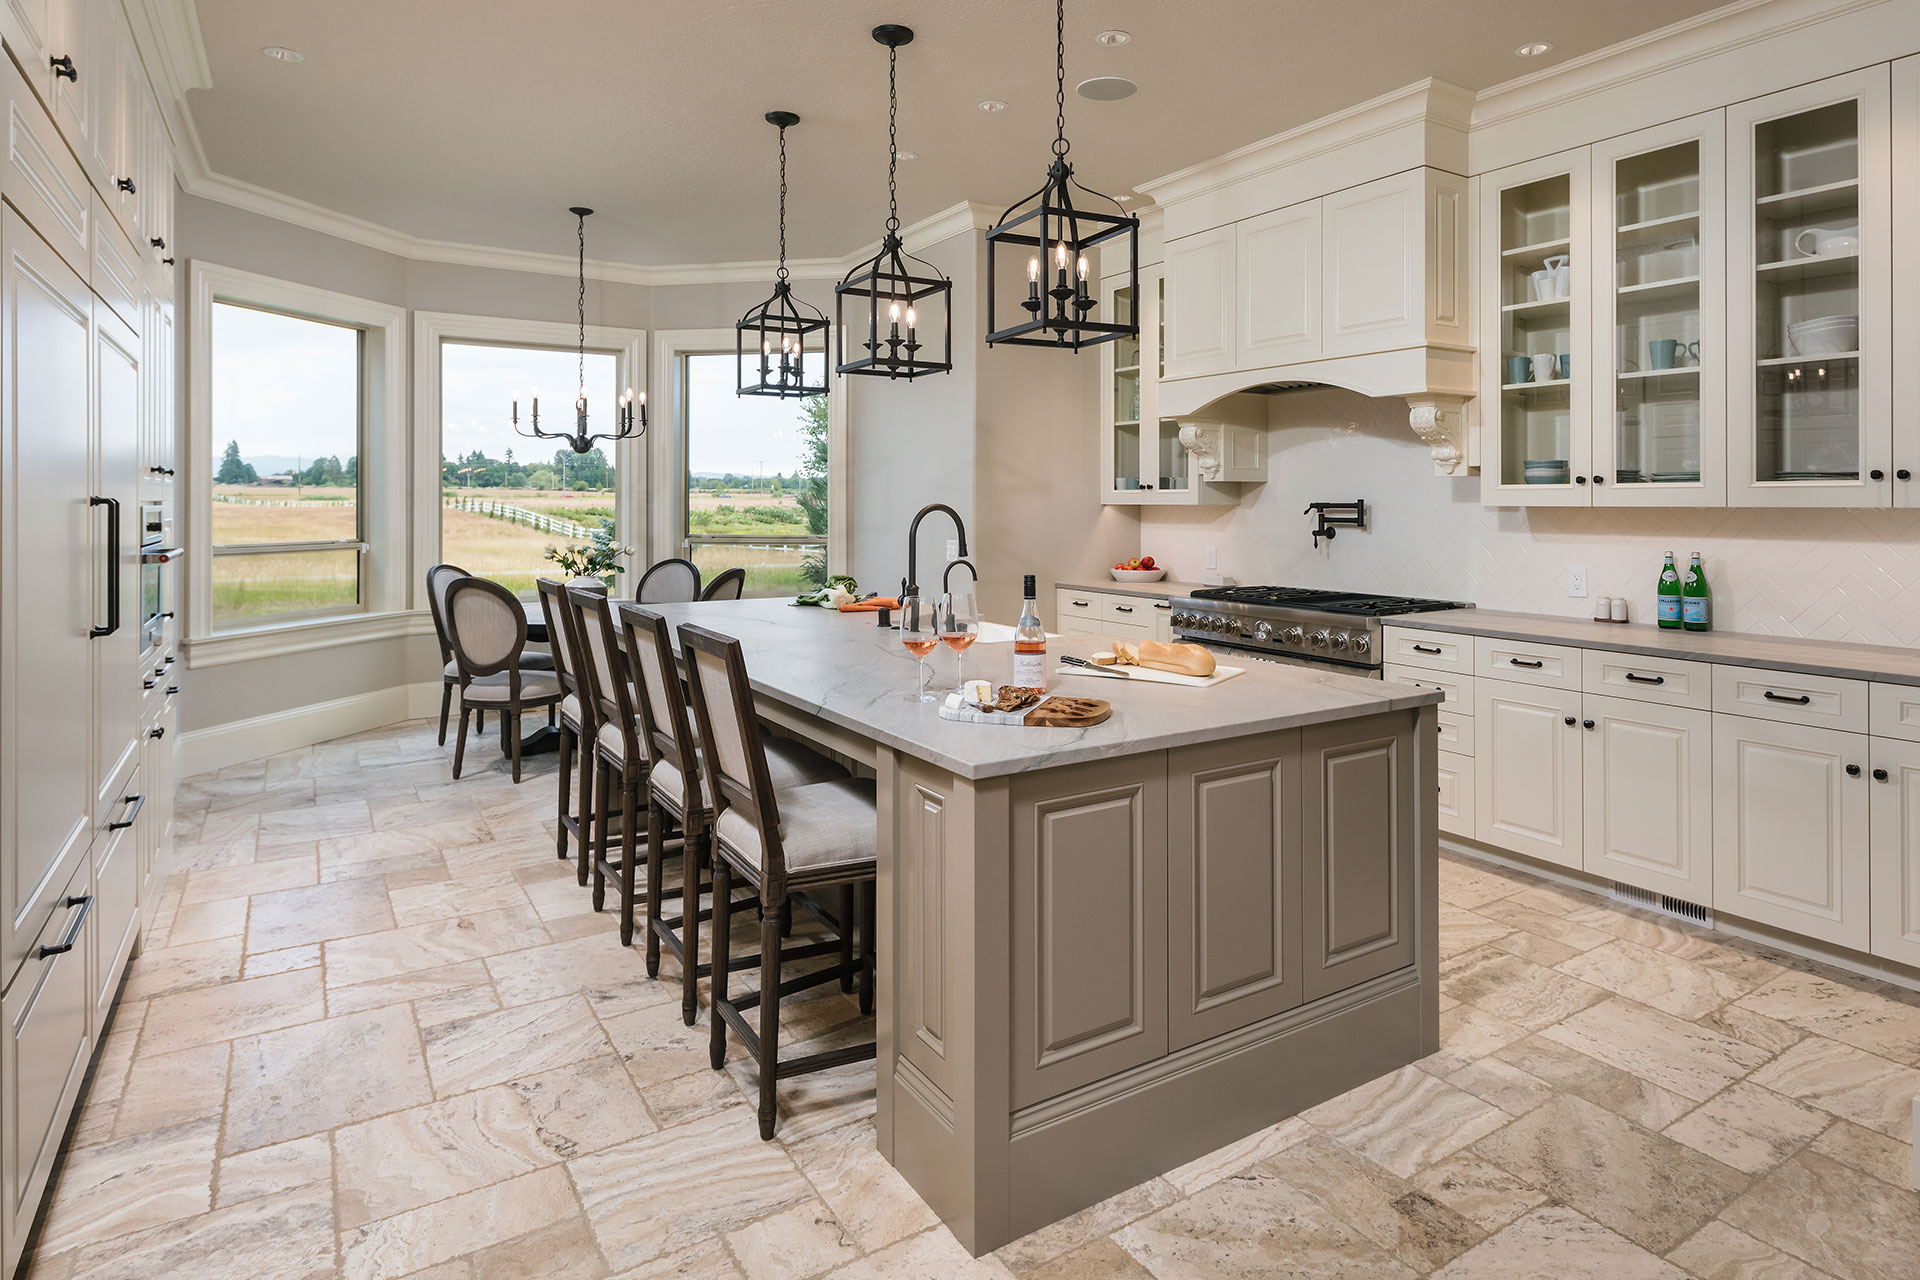 The renovated kitchen at Scout's House features a large island, a gas range with custom hood and two dishwashers.